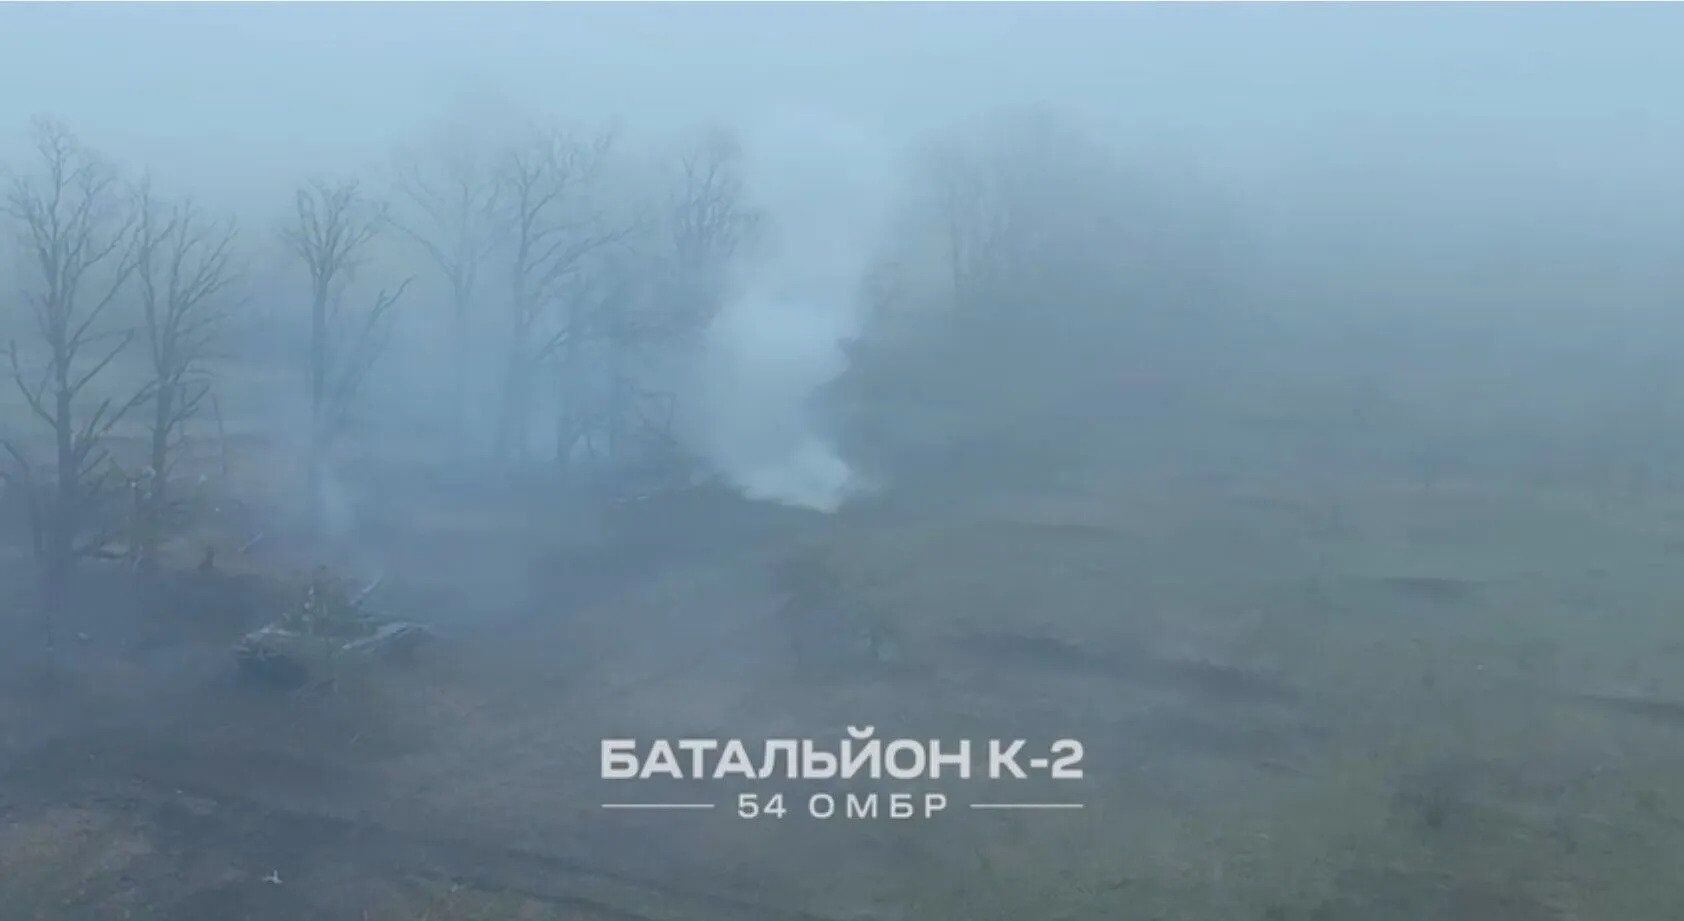 ''Cotton'' managed: a Ukrainian tank destroyed the occupiers' positions in the Luhansk region from 20 meters away. Video.